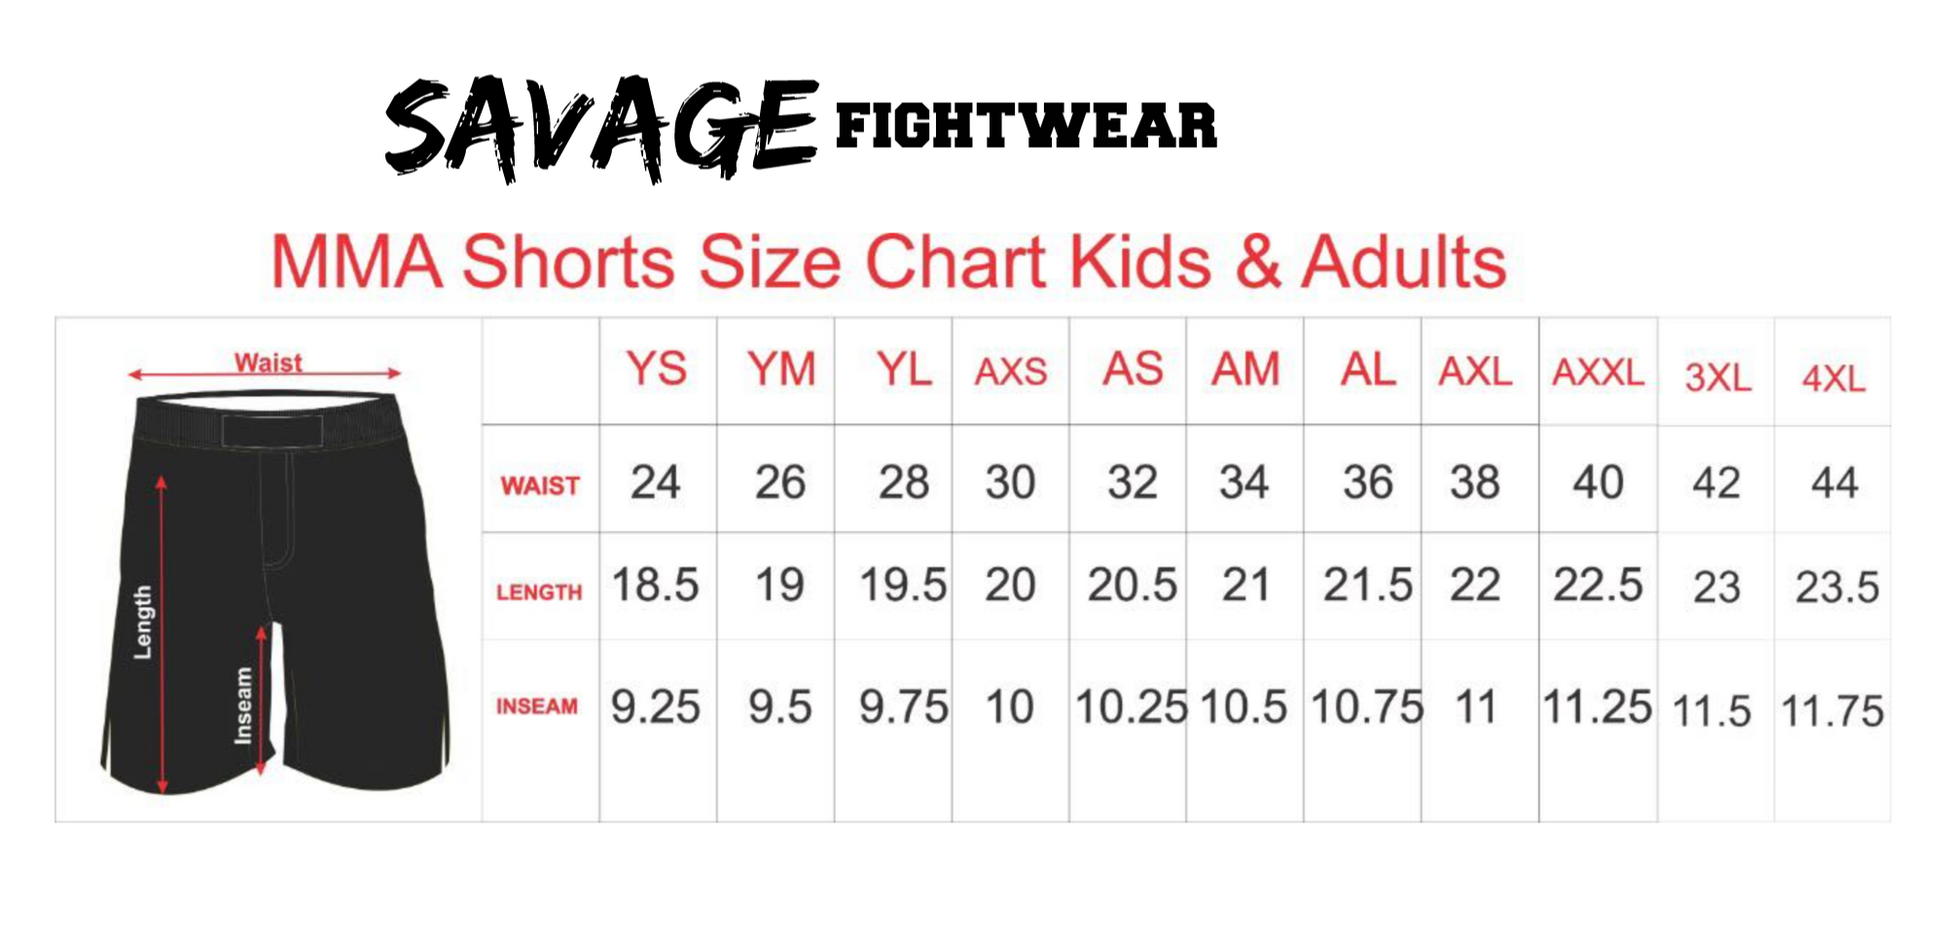 Deadly Locks Shorts Presale items Shipping To  Start December 5th Savage Fightwear